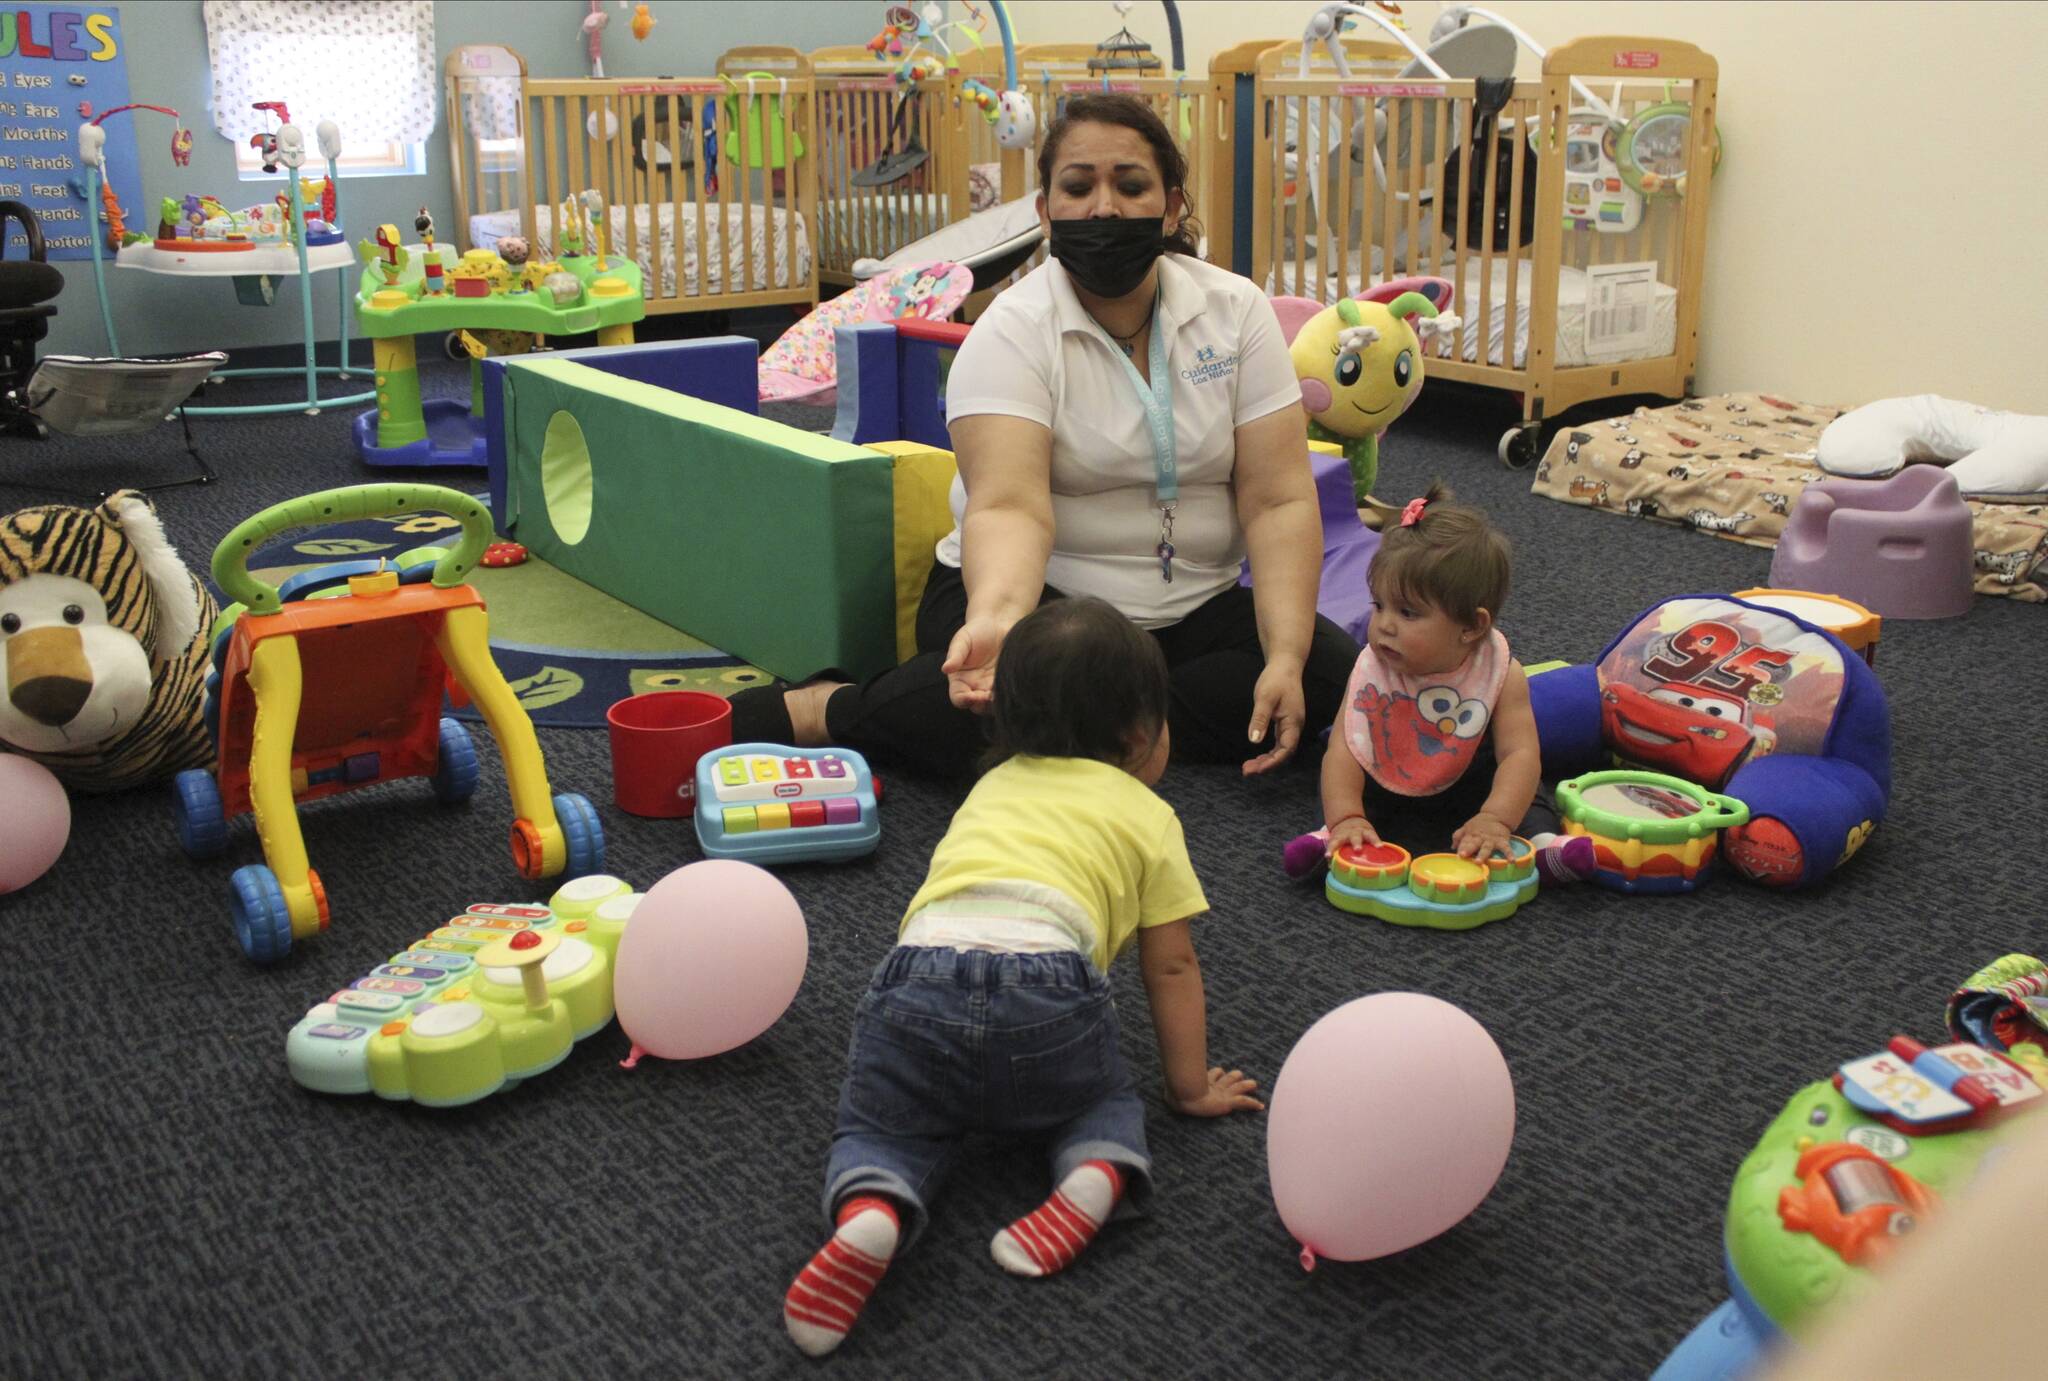 This May 4, 2021 image shows teacher Graciela Olague-Barrios working with two infants at Cuidando Los Ninos in Albuquerque, N.M. According to a recent report by the U.S. Chamber Foundation, childcare is in short supply across the country. Local experts say Juneau lacks affordable, reliable childcare. (AP Photo / Susan Montoya Bryan)